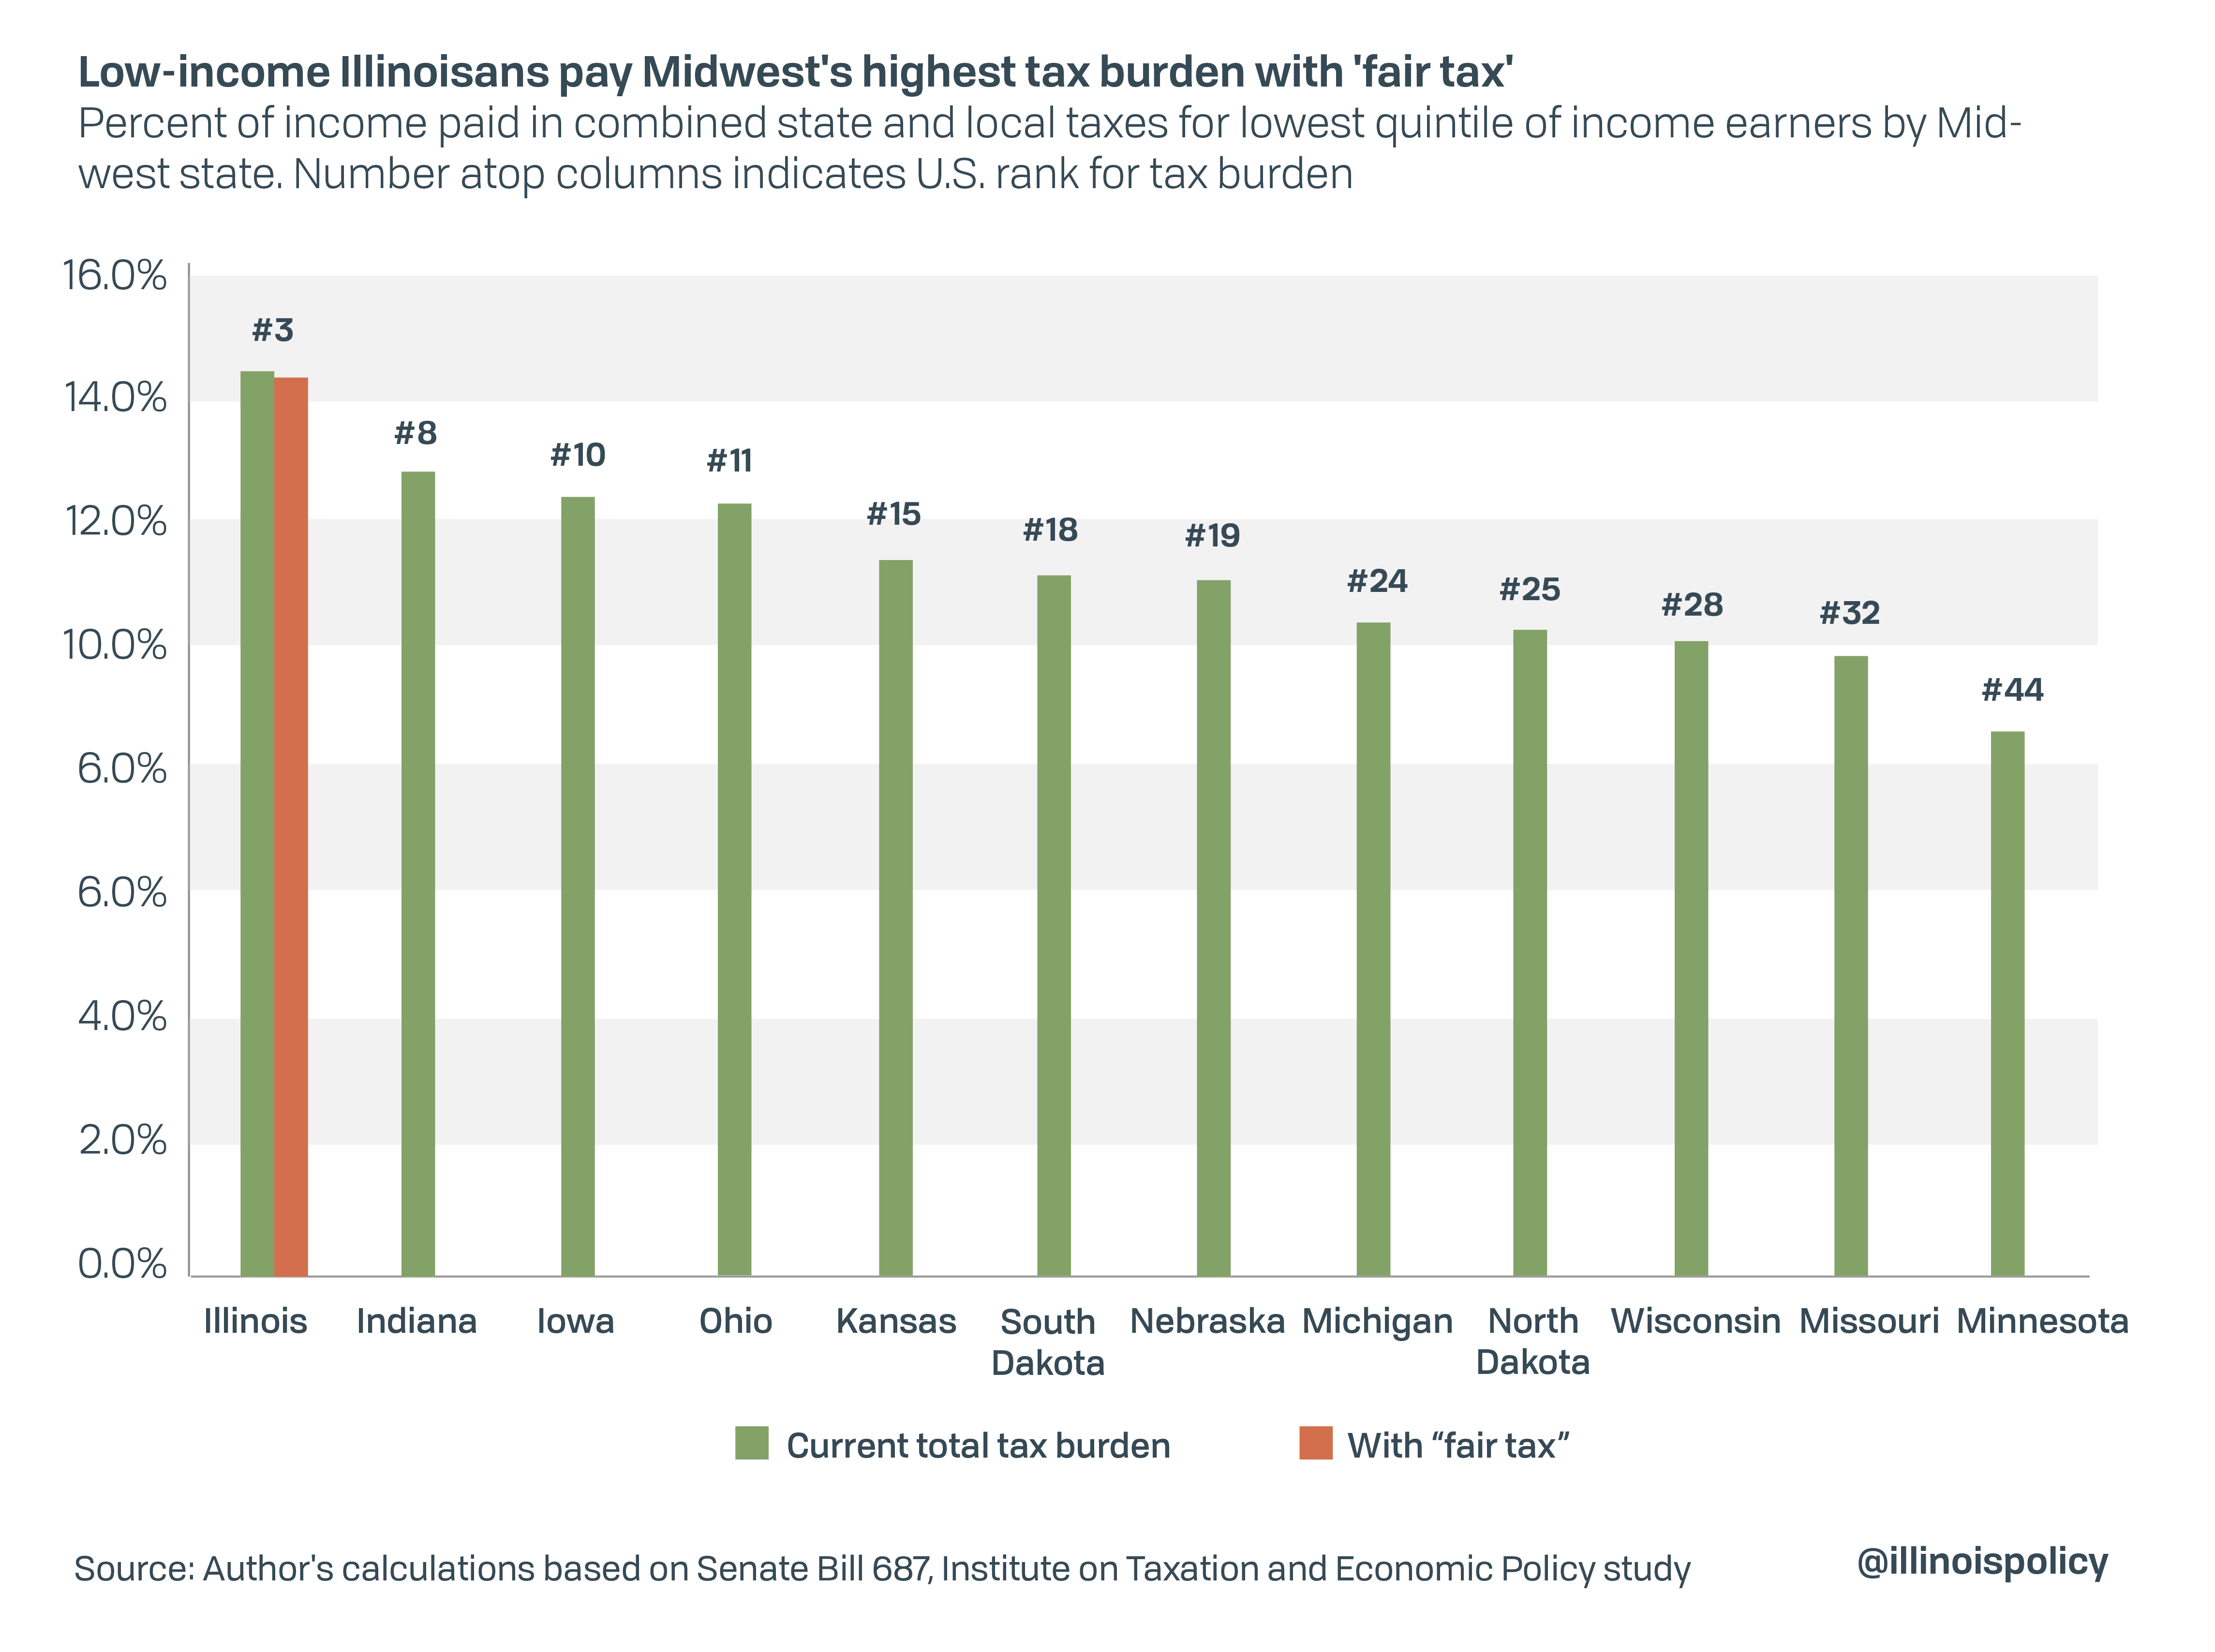 Low-income Illinoisans pay Midwest's highest tax burden with 'fair tax'